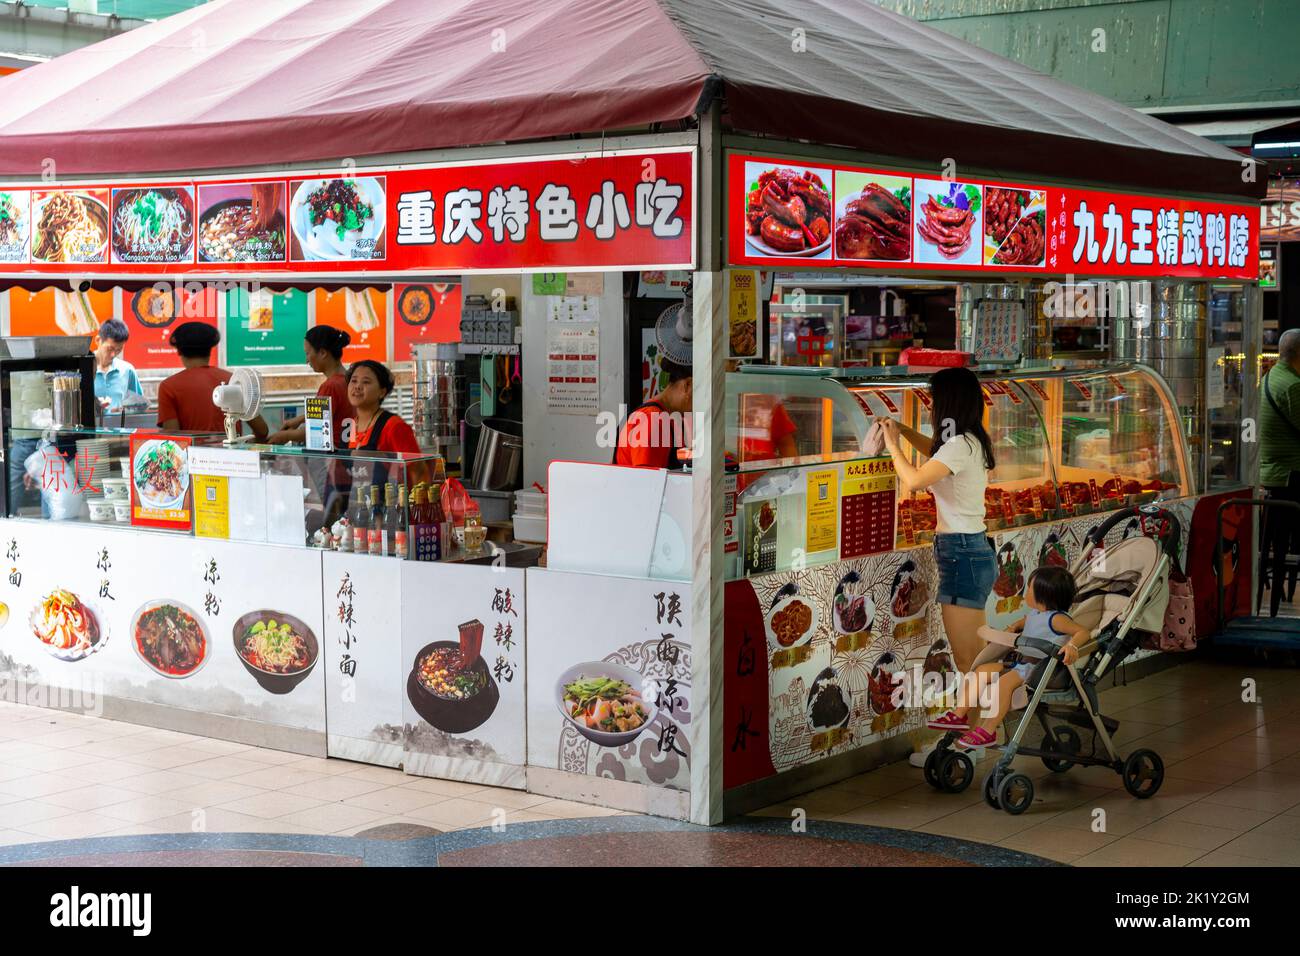 Woman buy food from street stall in Chinatown, Singapore Stock Photo